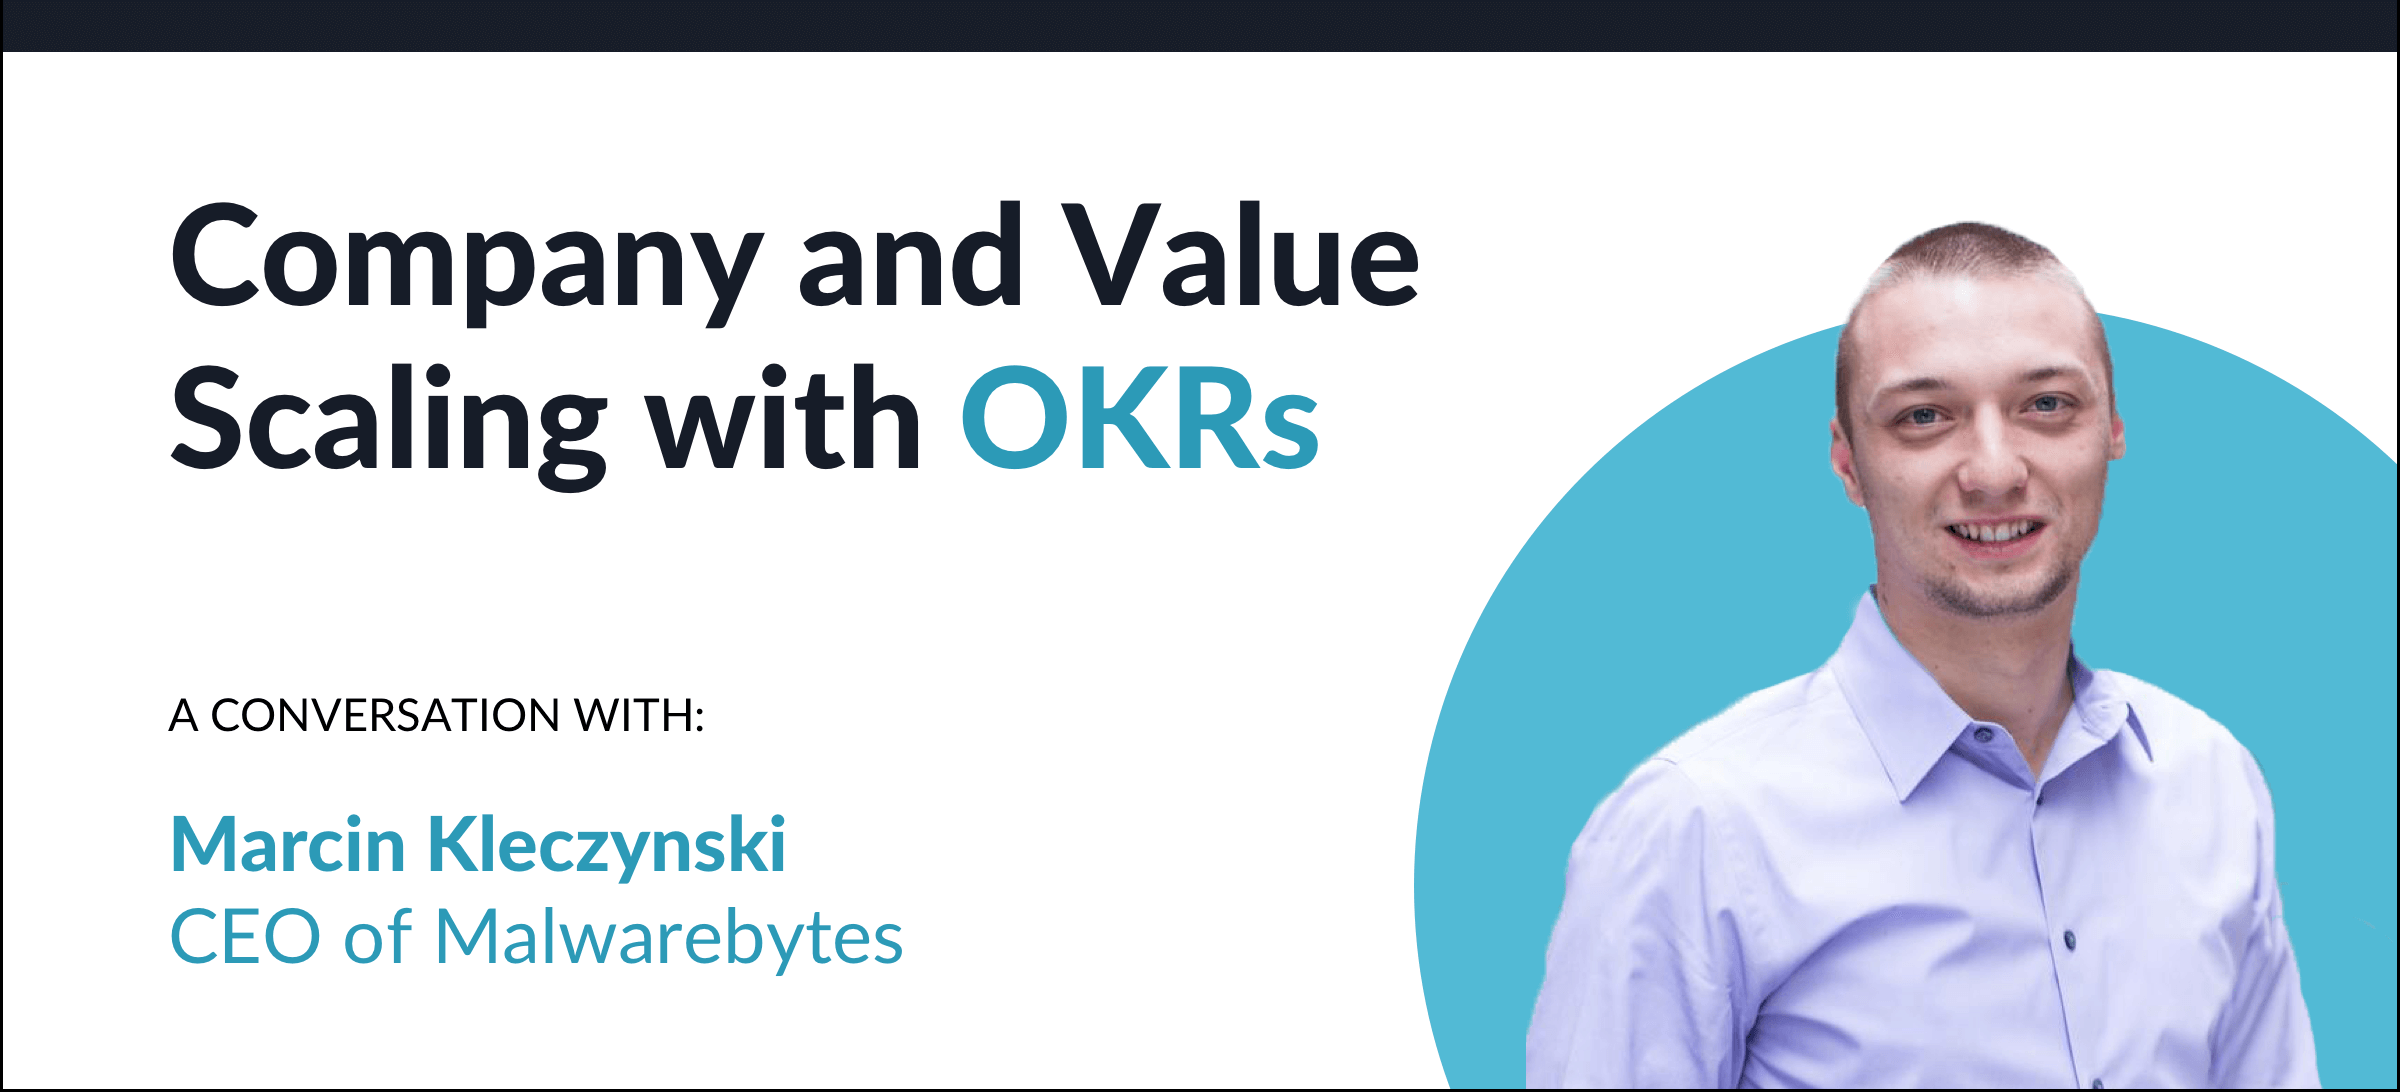 Company and Value Scaling with OKRs: A conversation with Marcin Kleczynski, CEO and founder of Malwarebytes